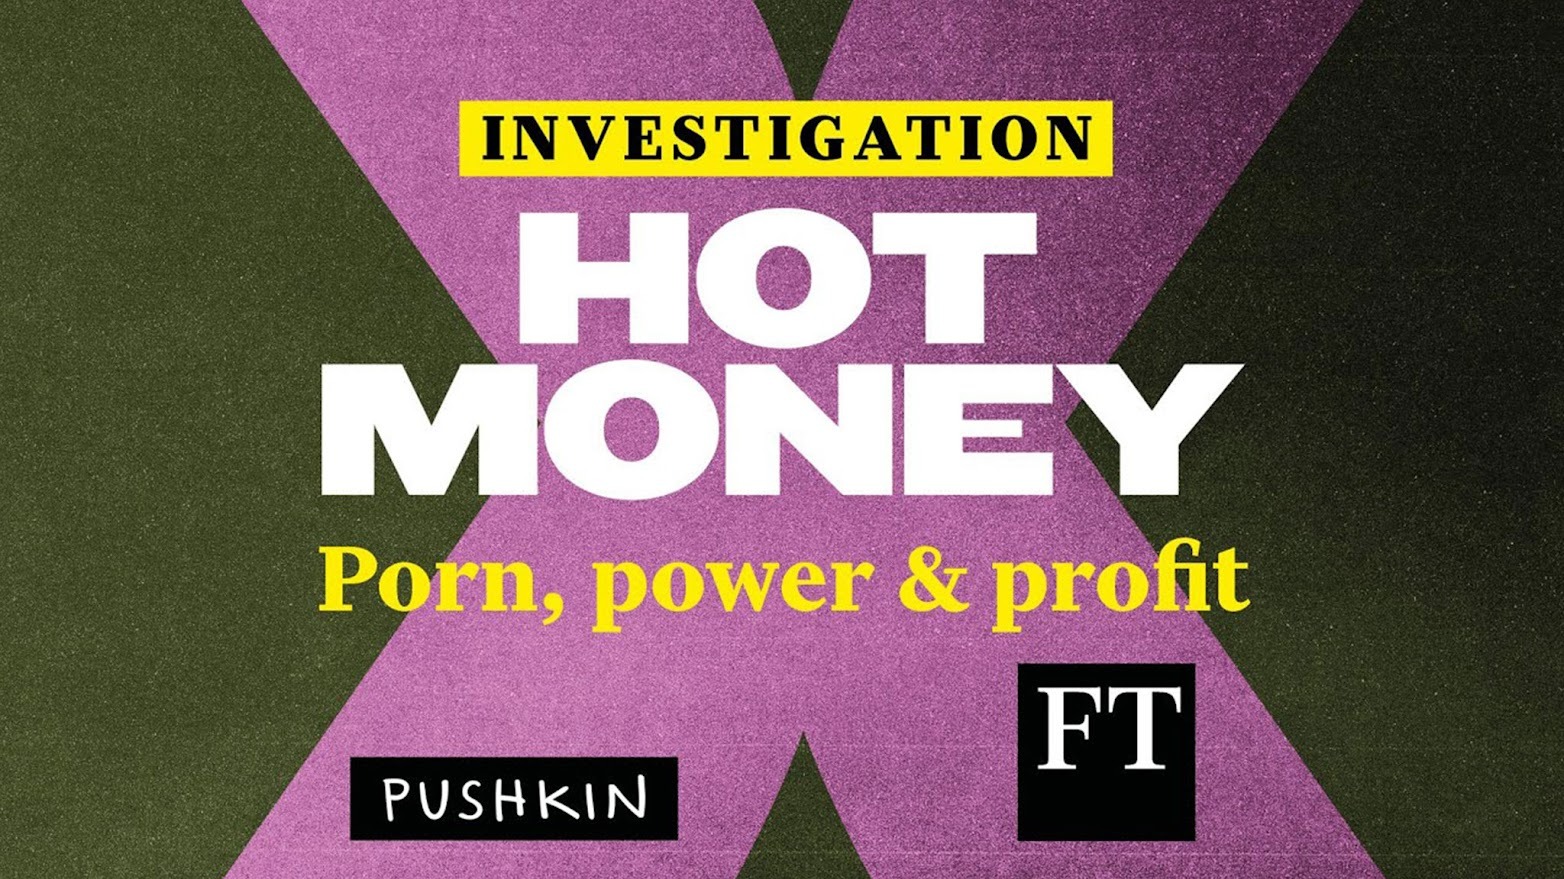 Kidnap Hard Sex Downlod Com - Knocking on the door of a porn empire | Financial Times